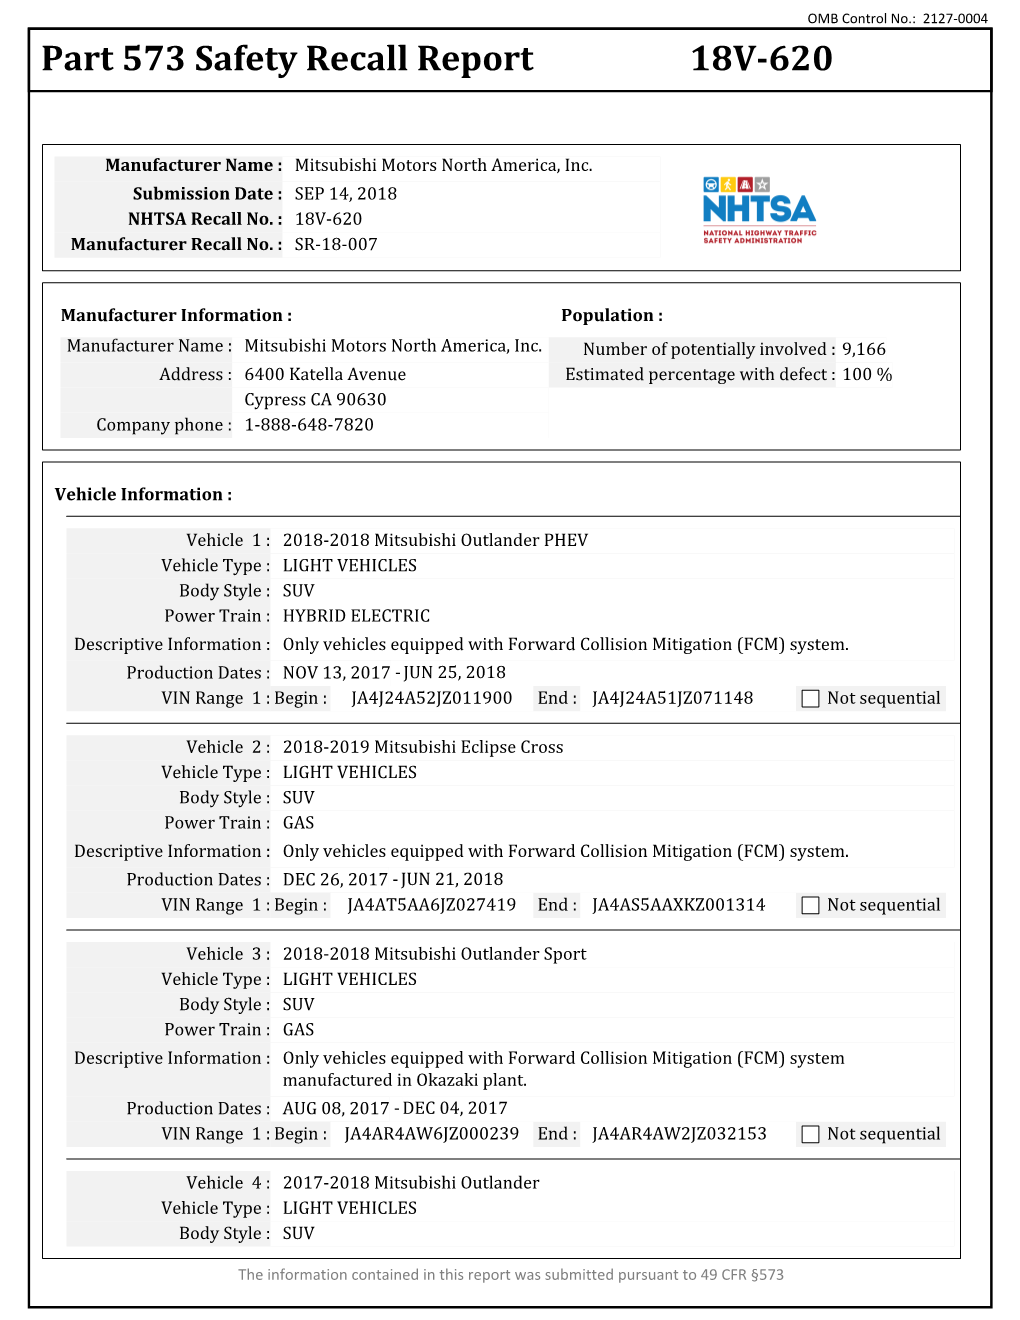 Part 573 Safety Recall Report 18V-620